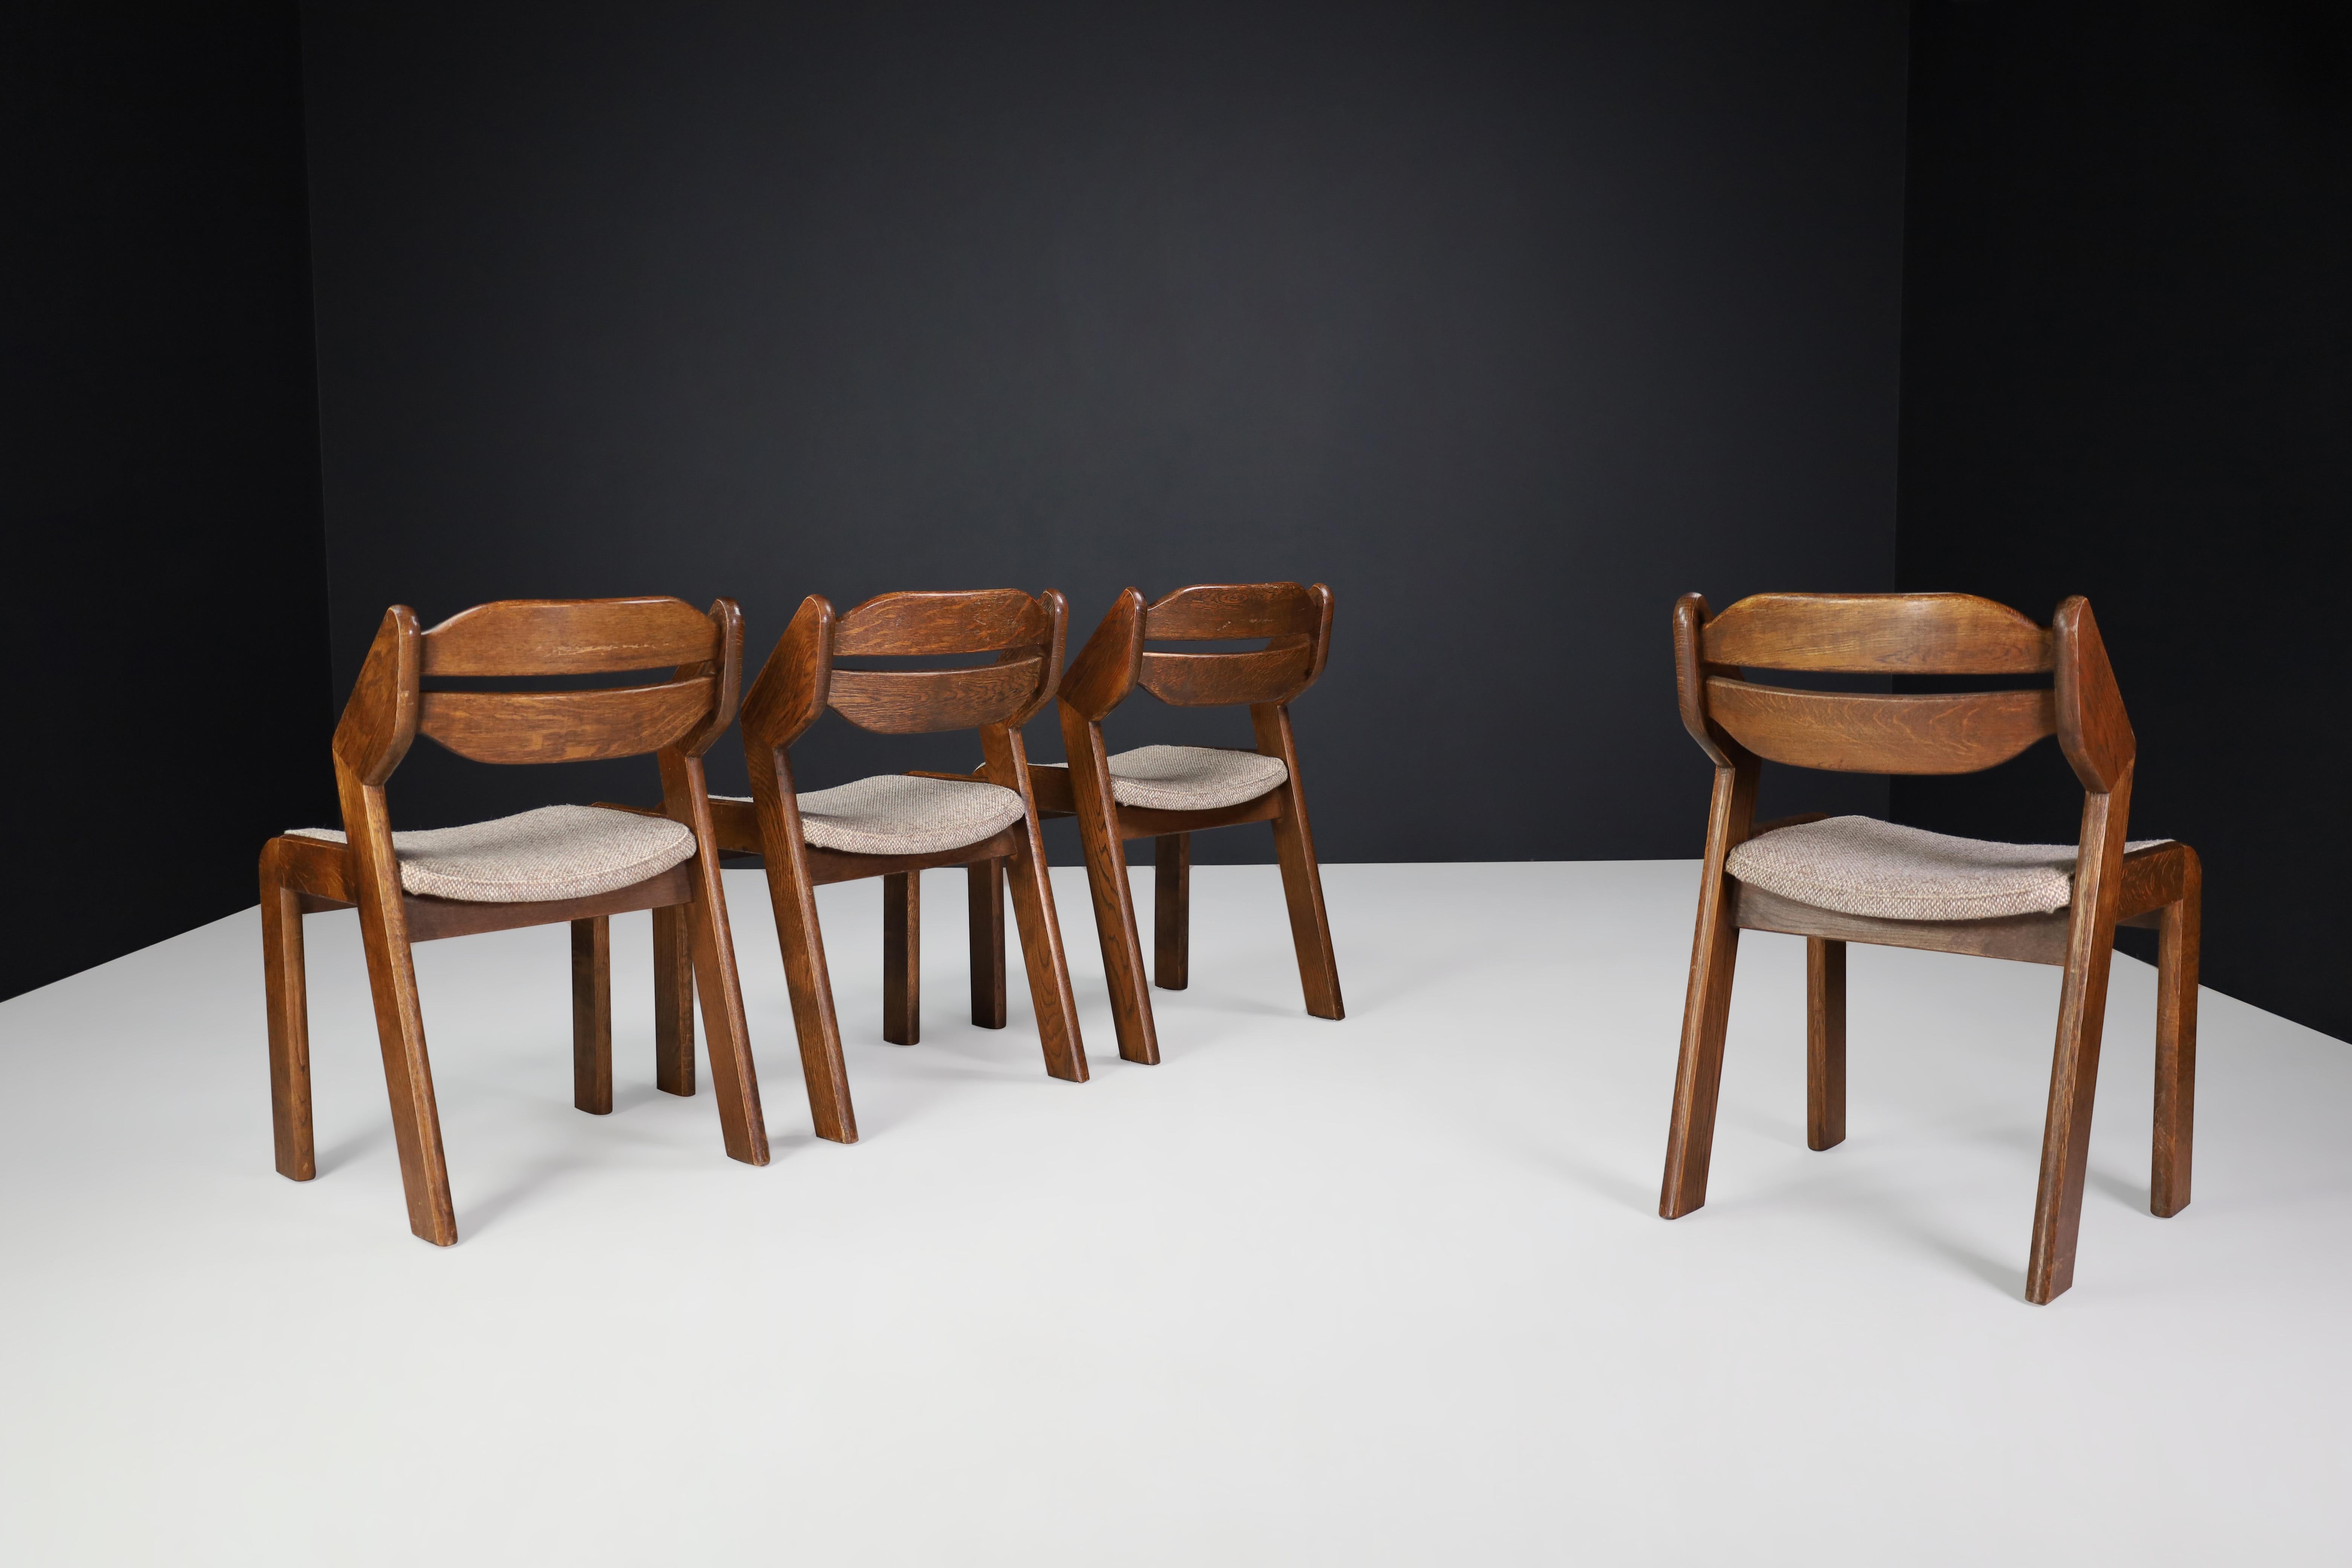 Sculptural Oak and Fabric Dining Chairs, France, 1960s For Sale 3